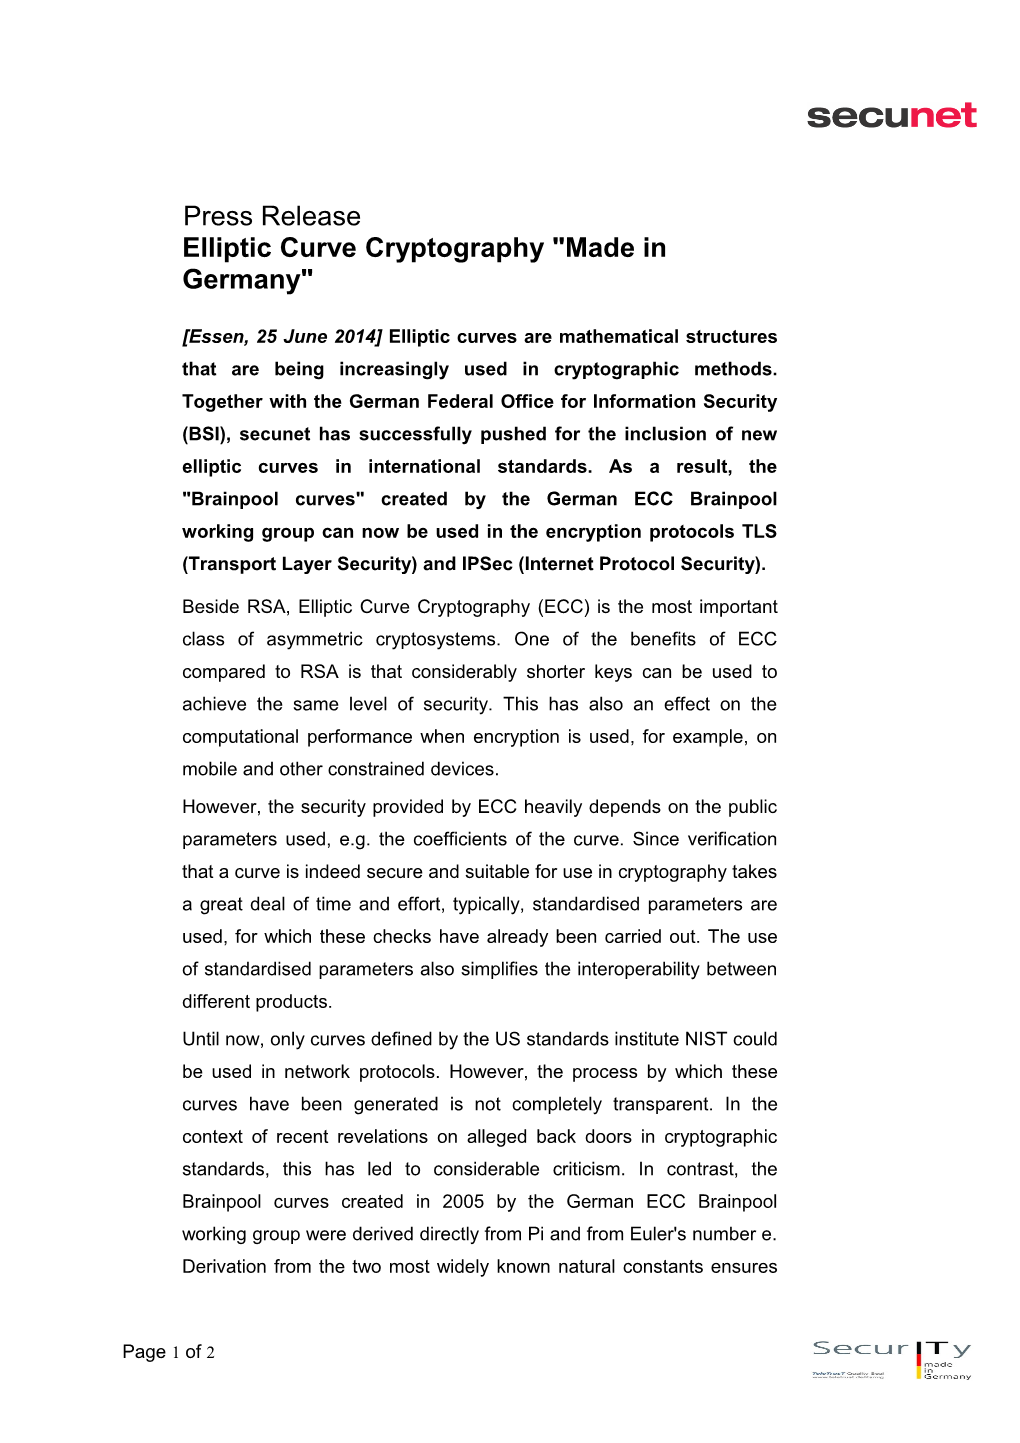 Elliptic Curve Cryptography Made in Germany